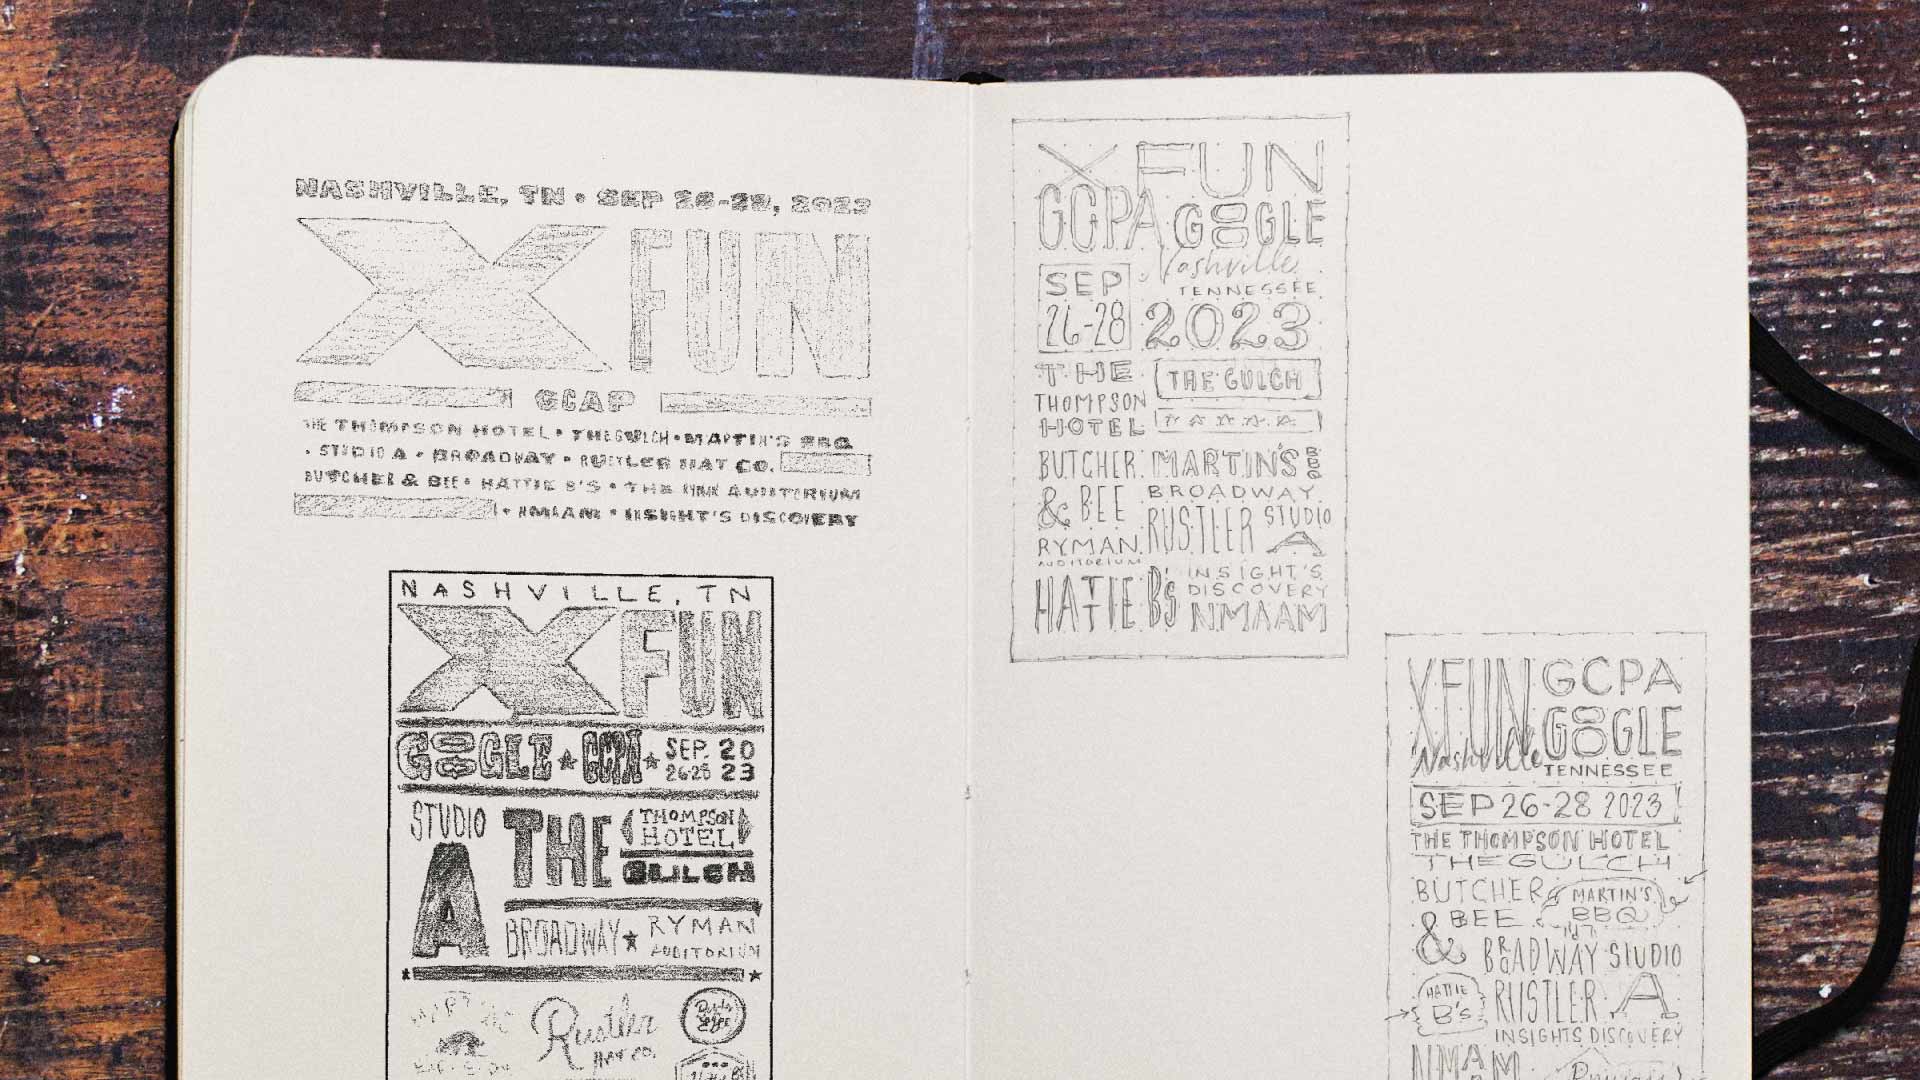 Sketchbook pages showing preliminary ideas for the poster